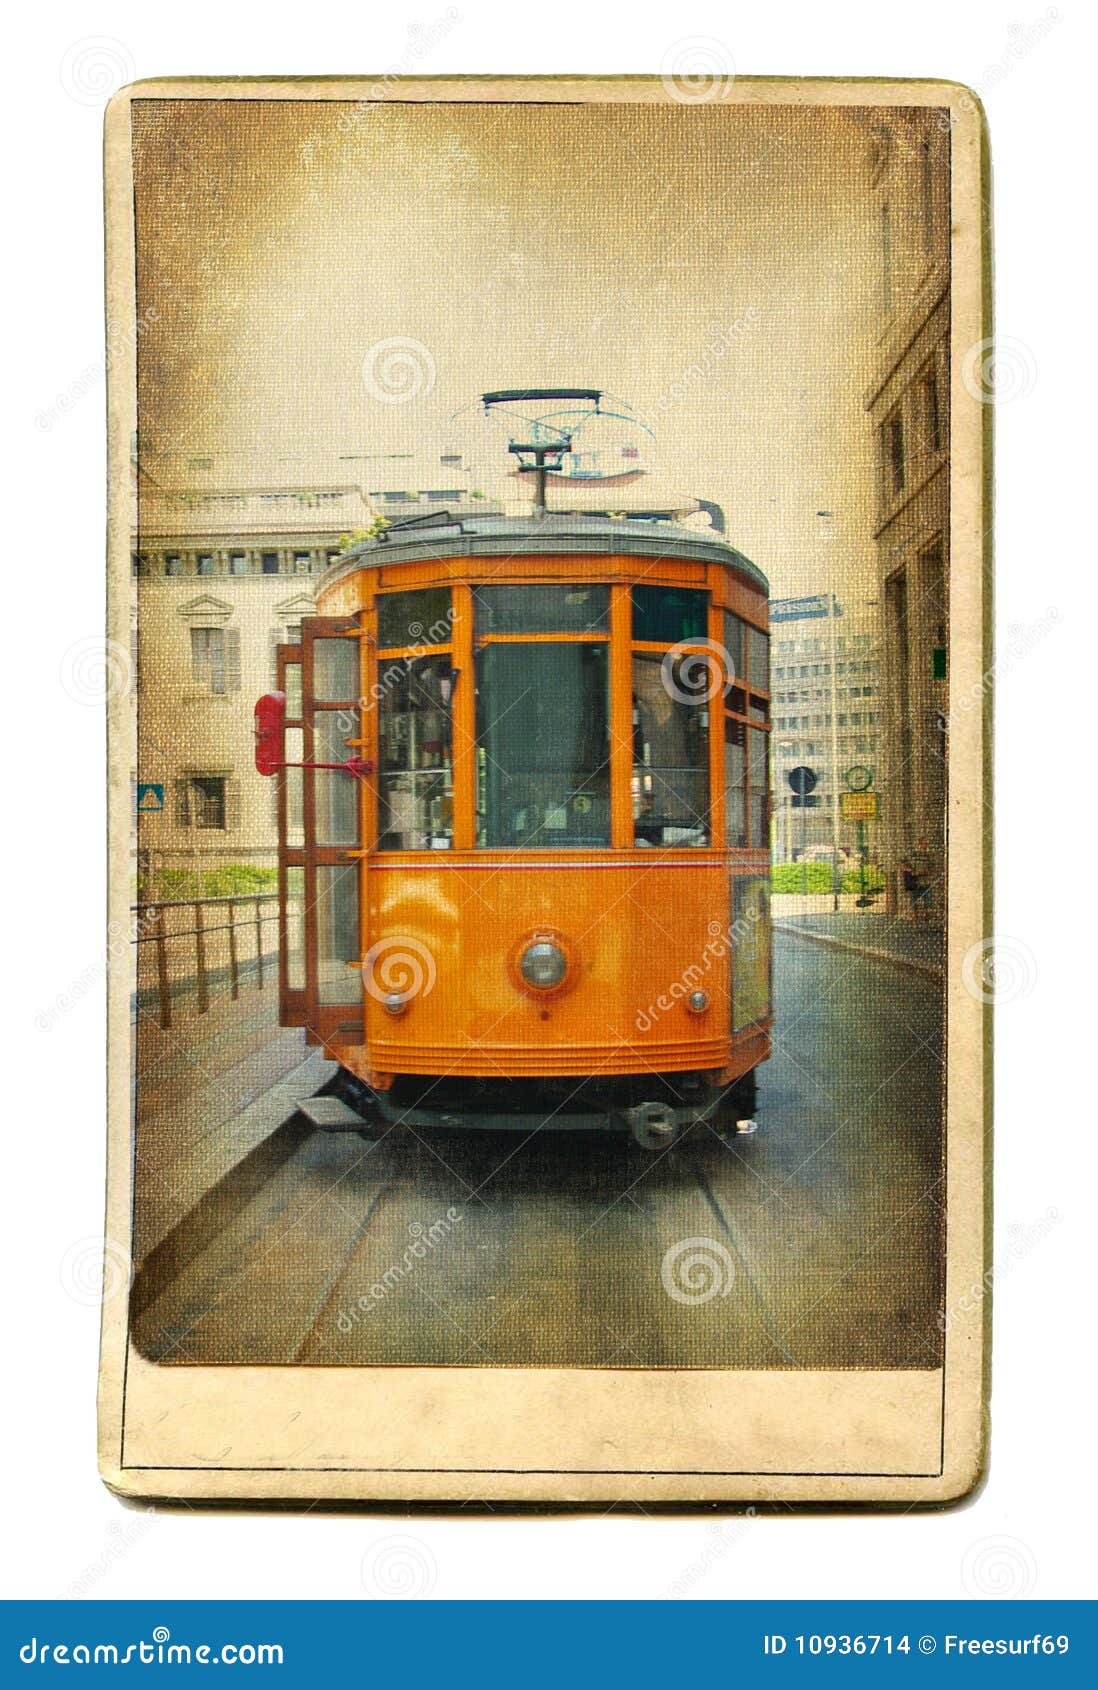 Old tram stock photo. Image of capital, summer, architecture - 10936714